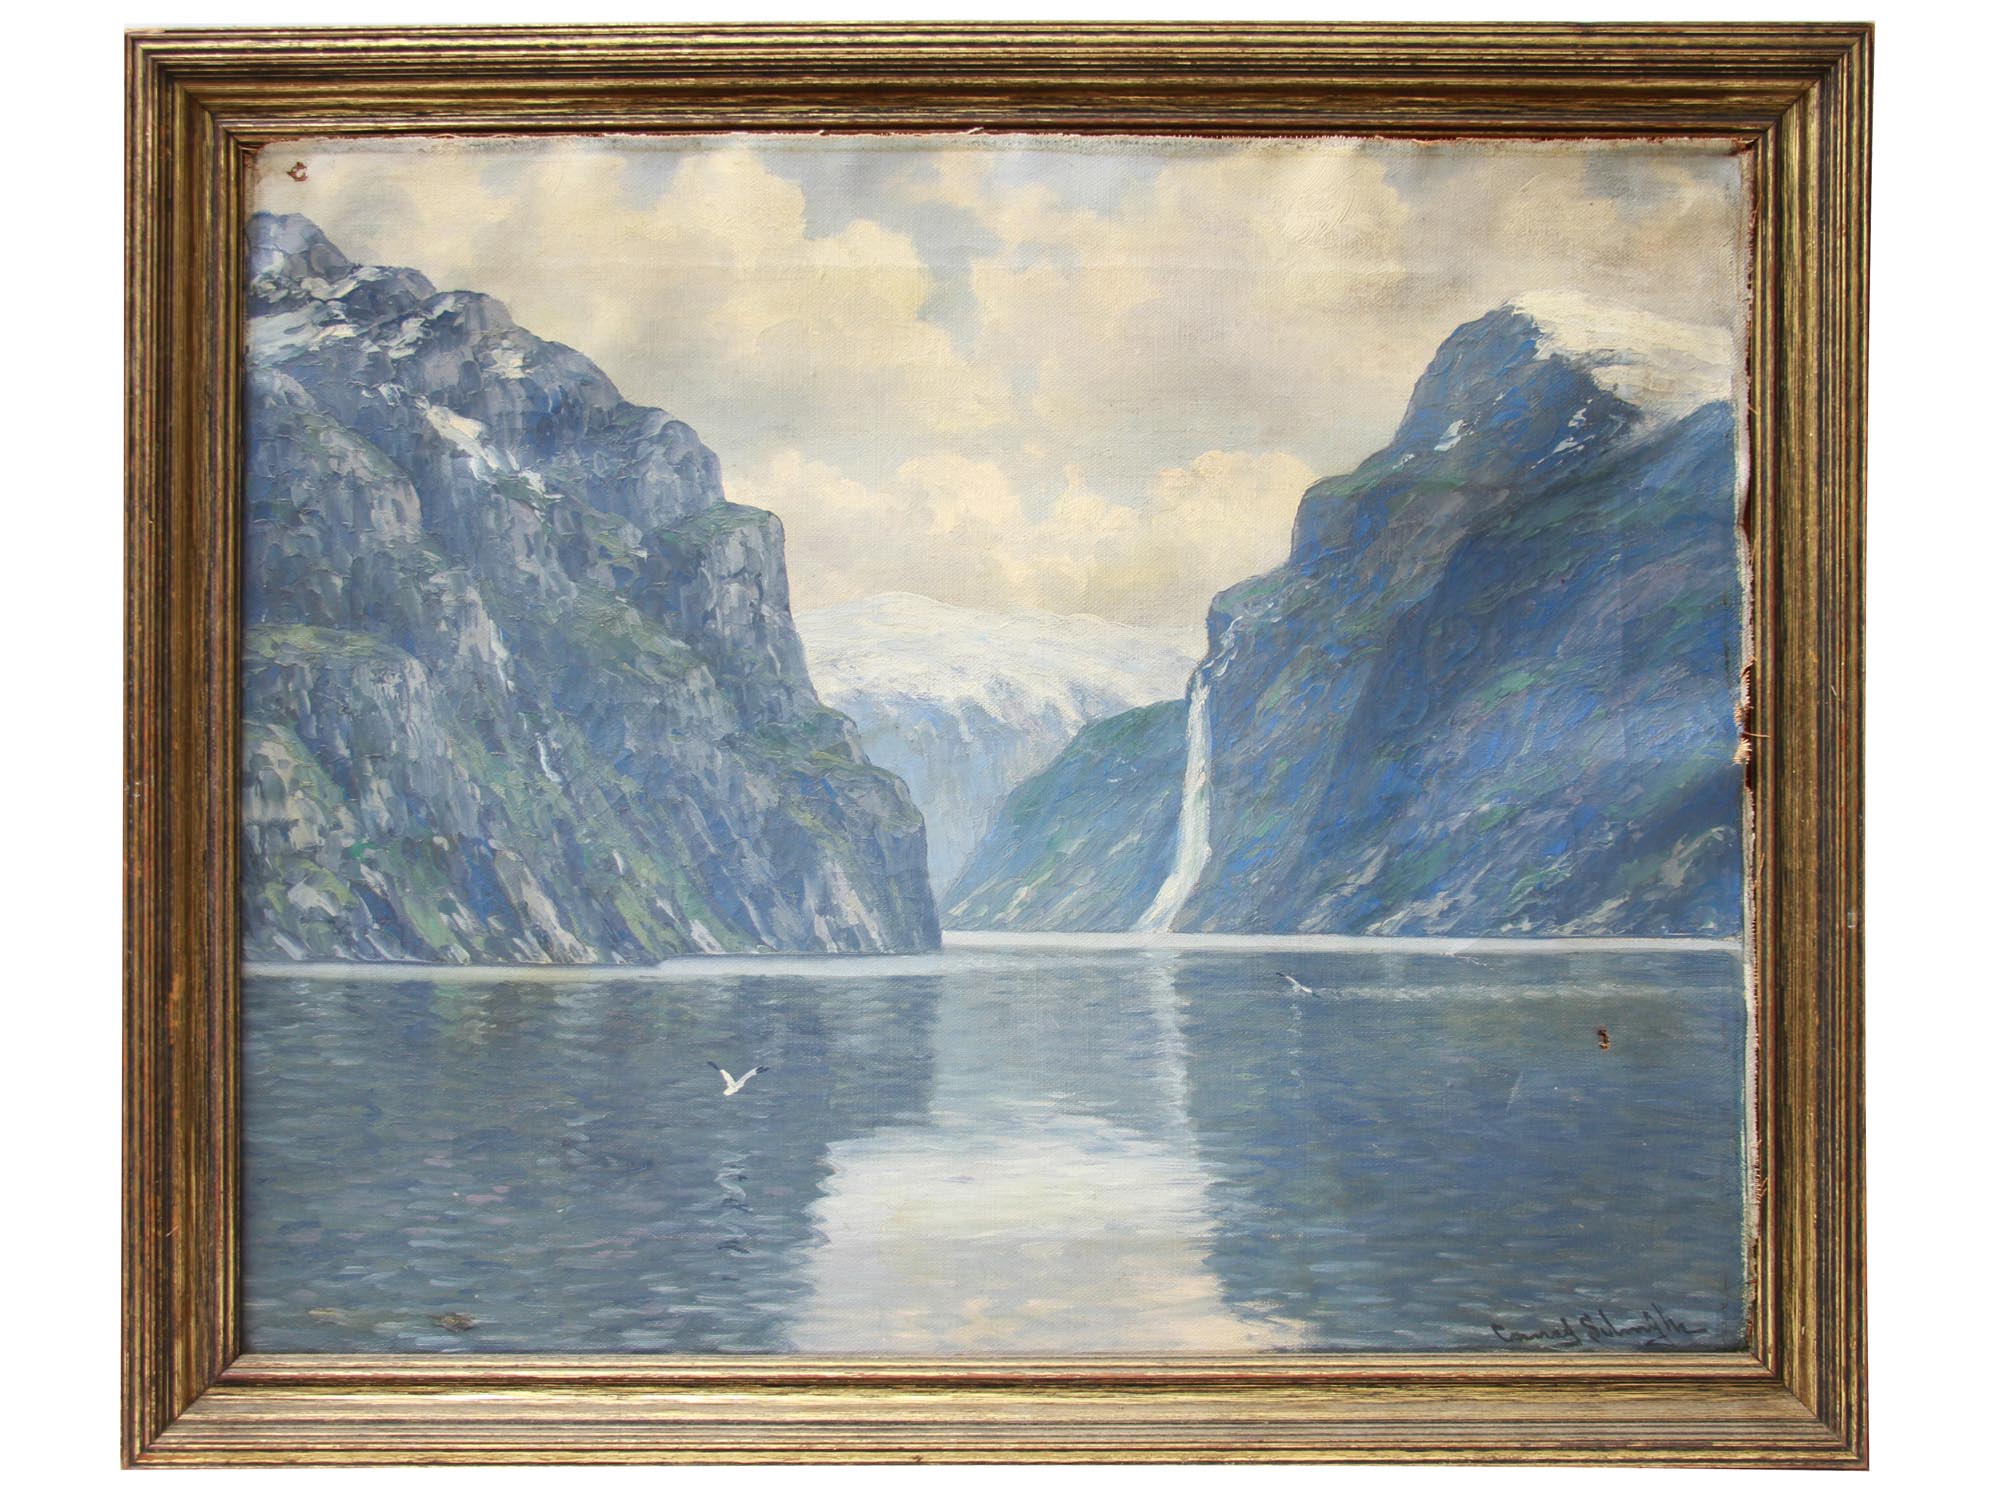 A NORSE OIL PAINTING SEASCAPE BY CONRAD SELMYHR PIC-0